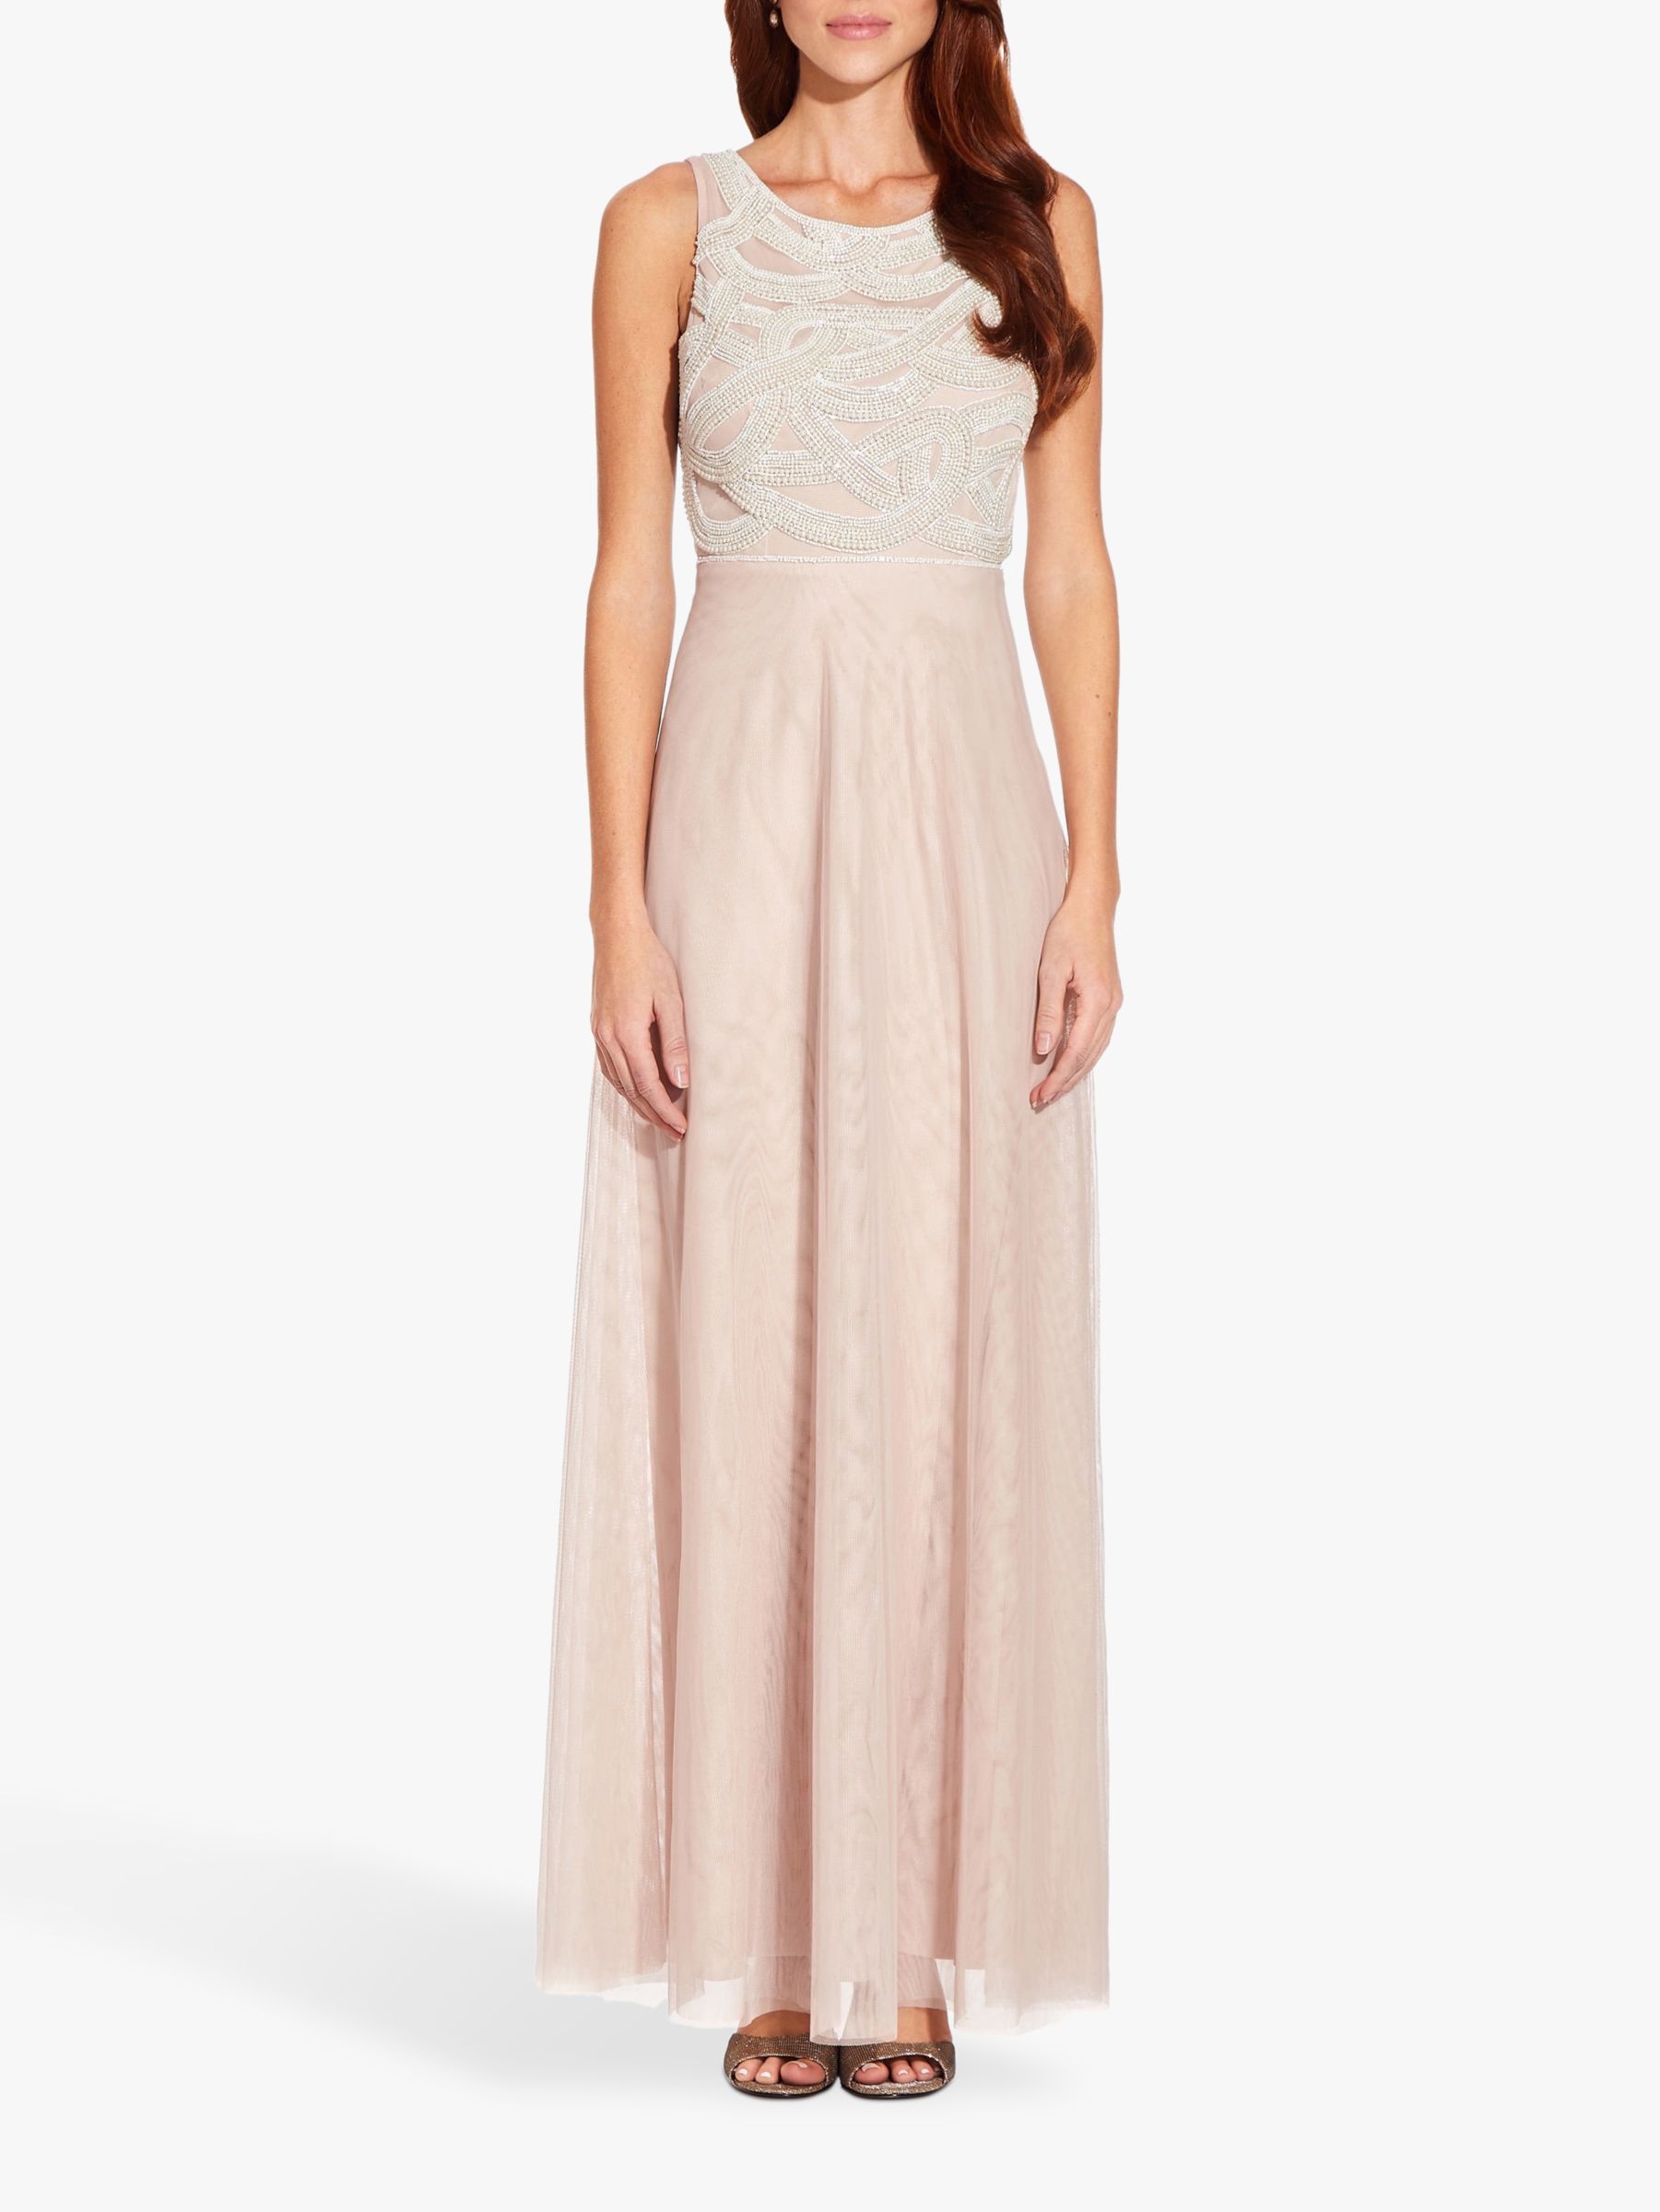 Adrianna Papell Beaded Sleeveless Gown, Shell